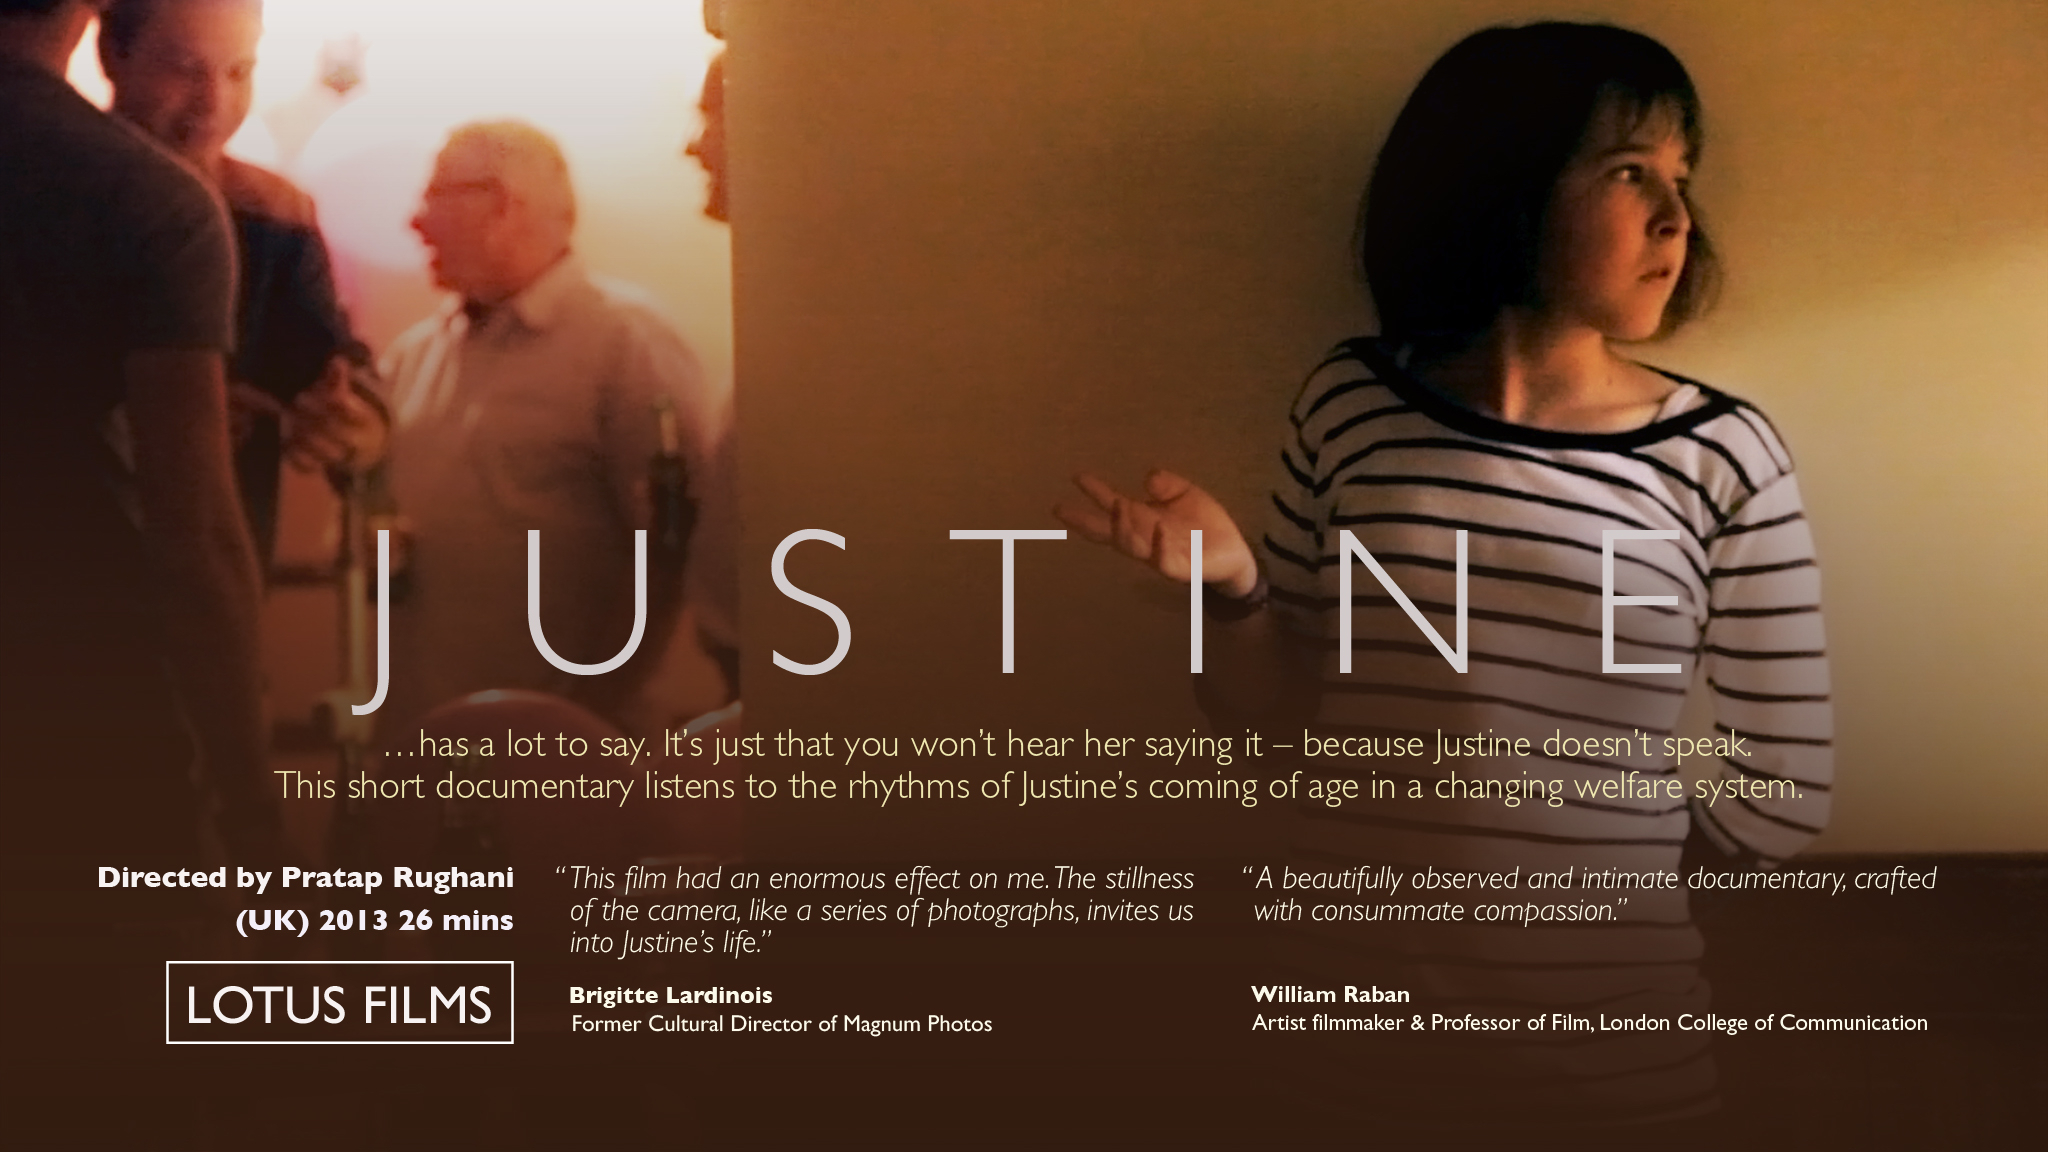 “Justine” to screen at the World Documentary Film & TV Conference 2014